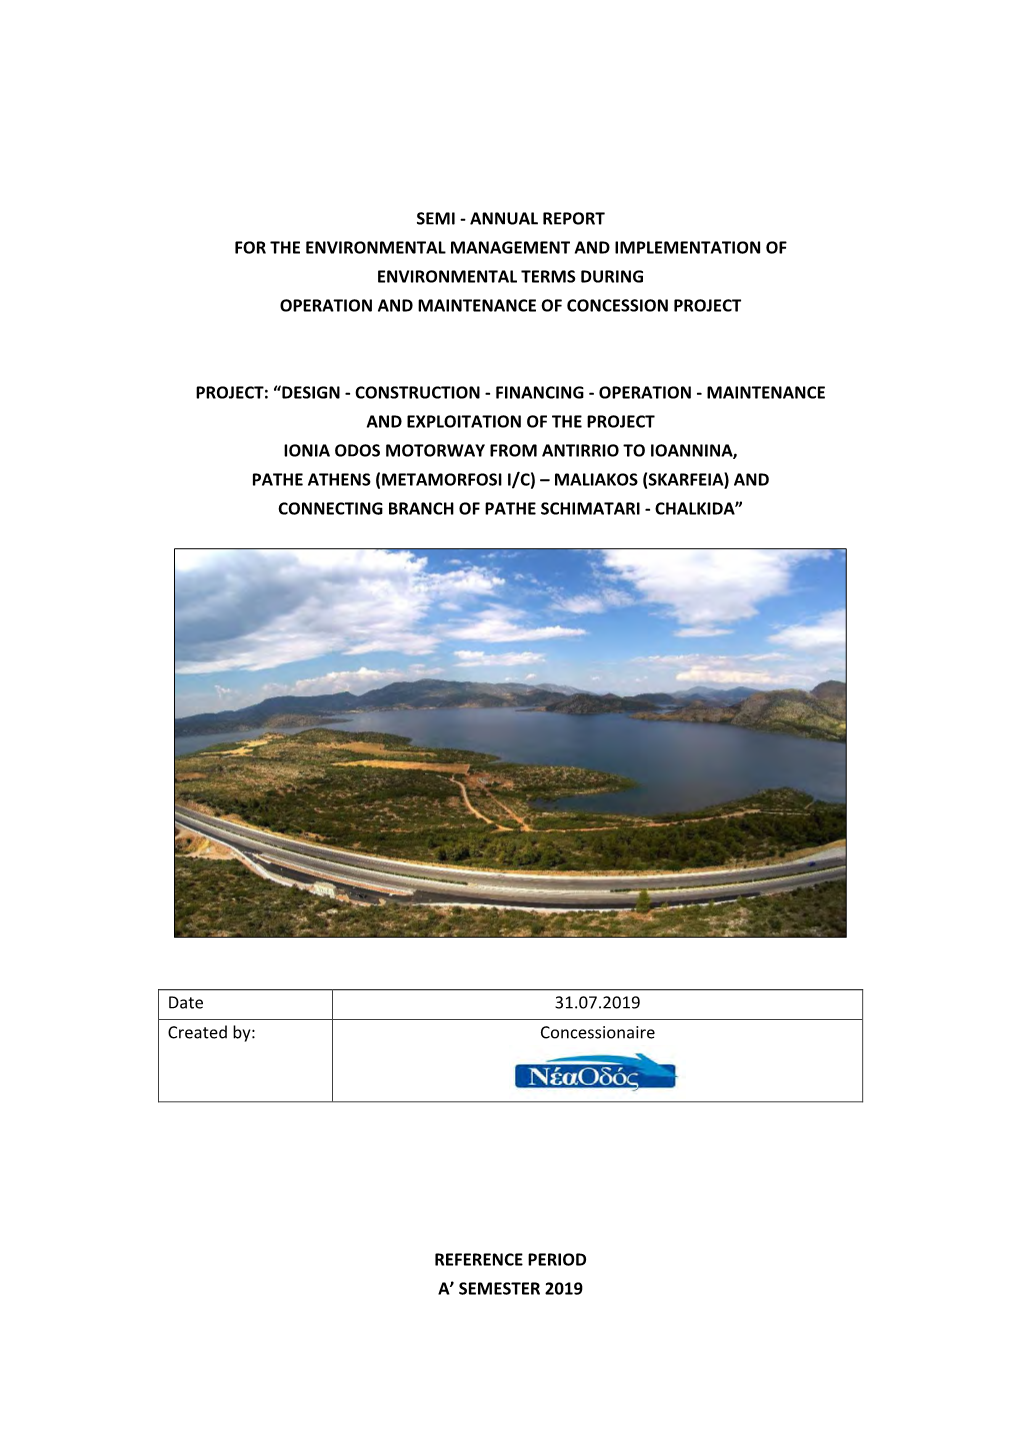 Semi - Annual Report for the Environmental Management and Implementation of Environmental Terms During Operation and Maintenance of Concession Project